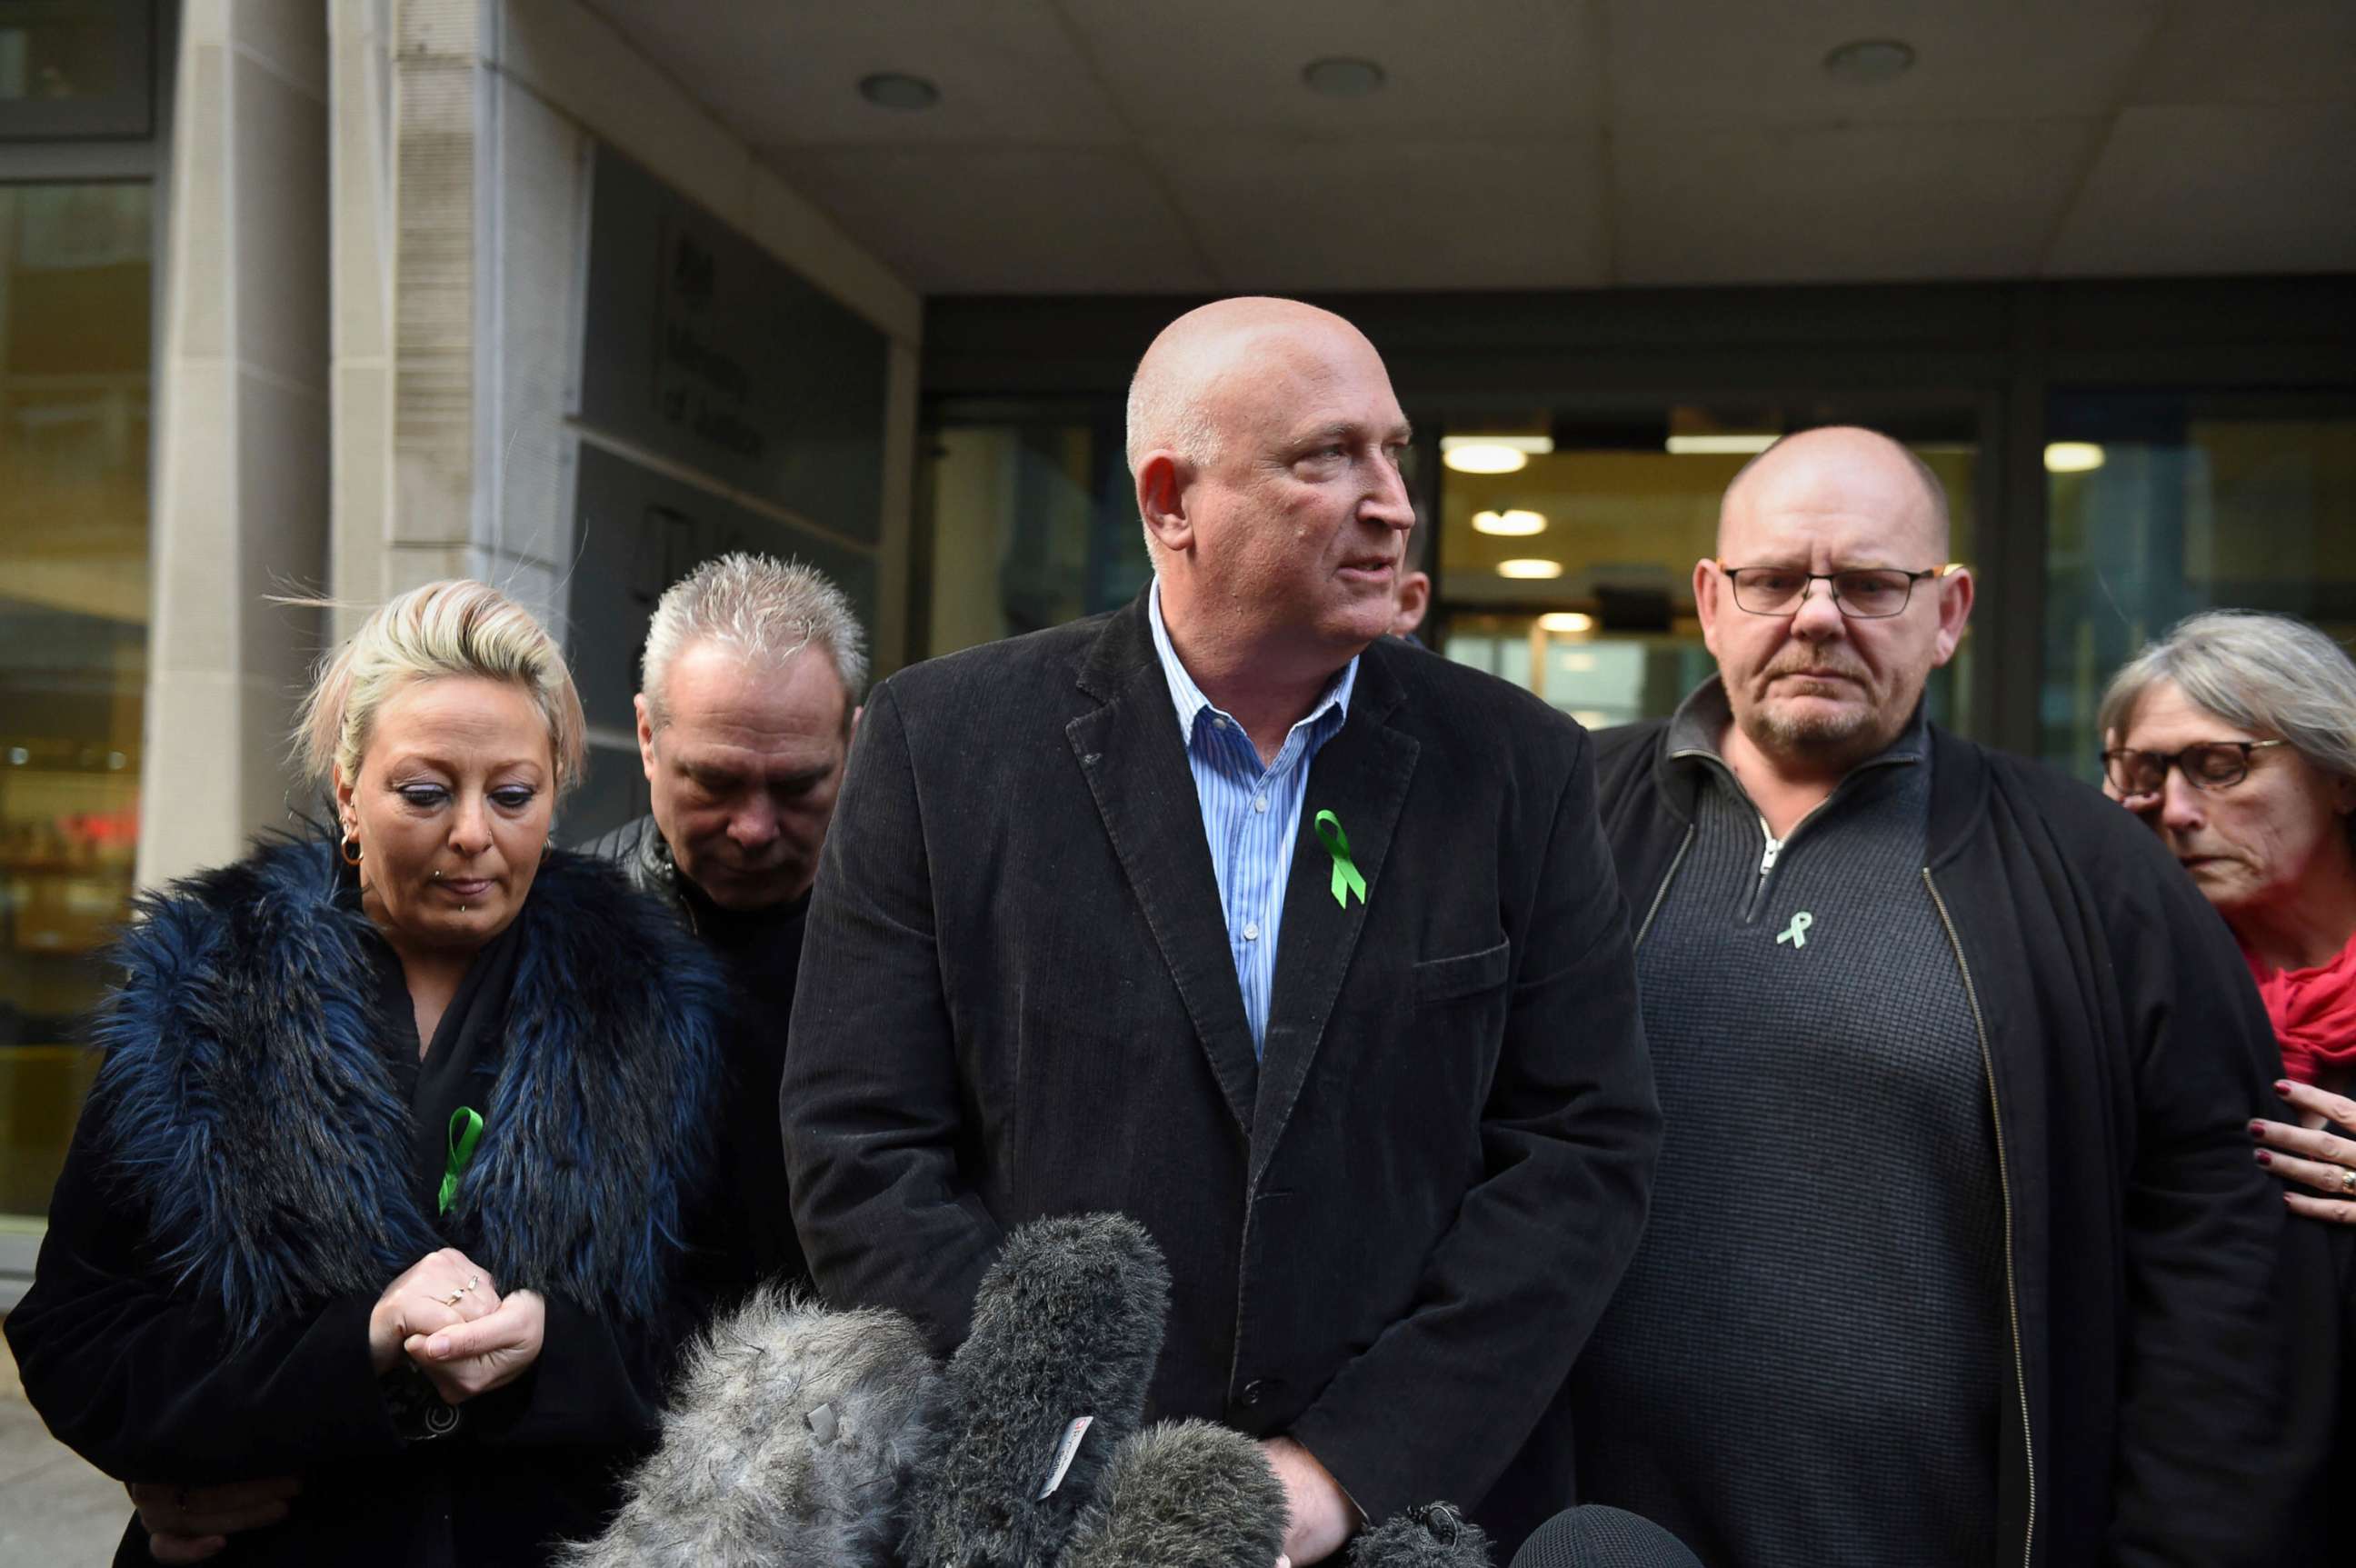 PHOTO: The family of Harry Dunn, from left, mother Charlotte Charles, stepfather Bruce Charles, family spokesman Radd Seiger, father Tim Dunn and stepmother Tracey Dunn speak to the media outside the Ministry Of Justice in London, Dec. 20, 2019.